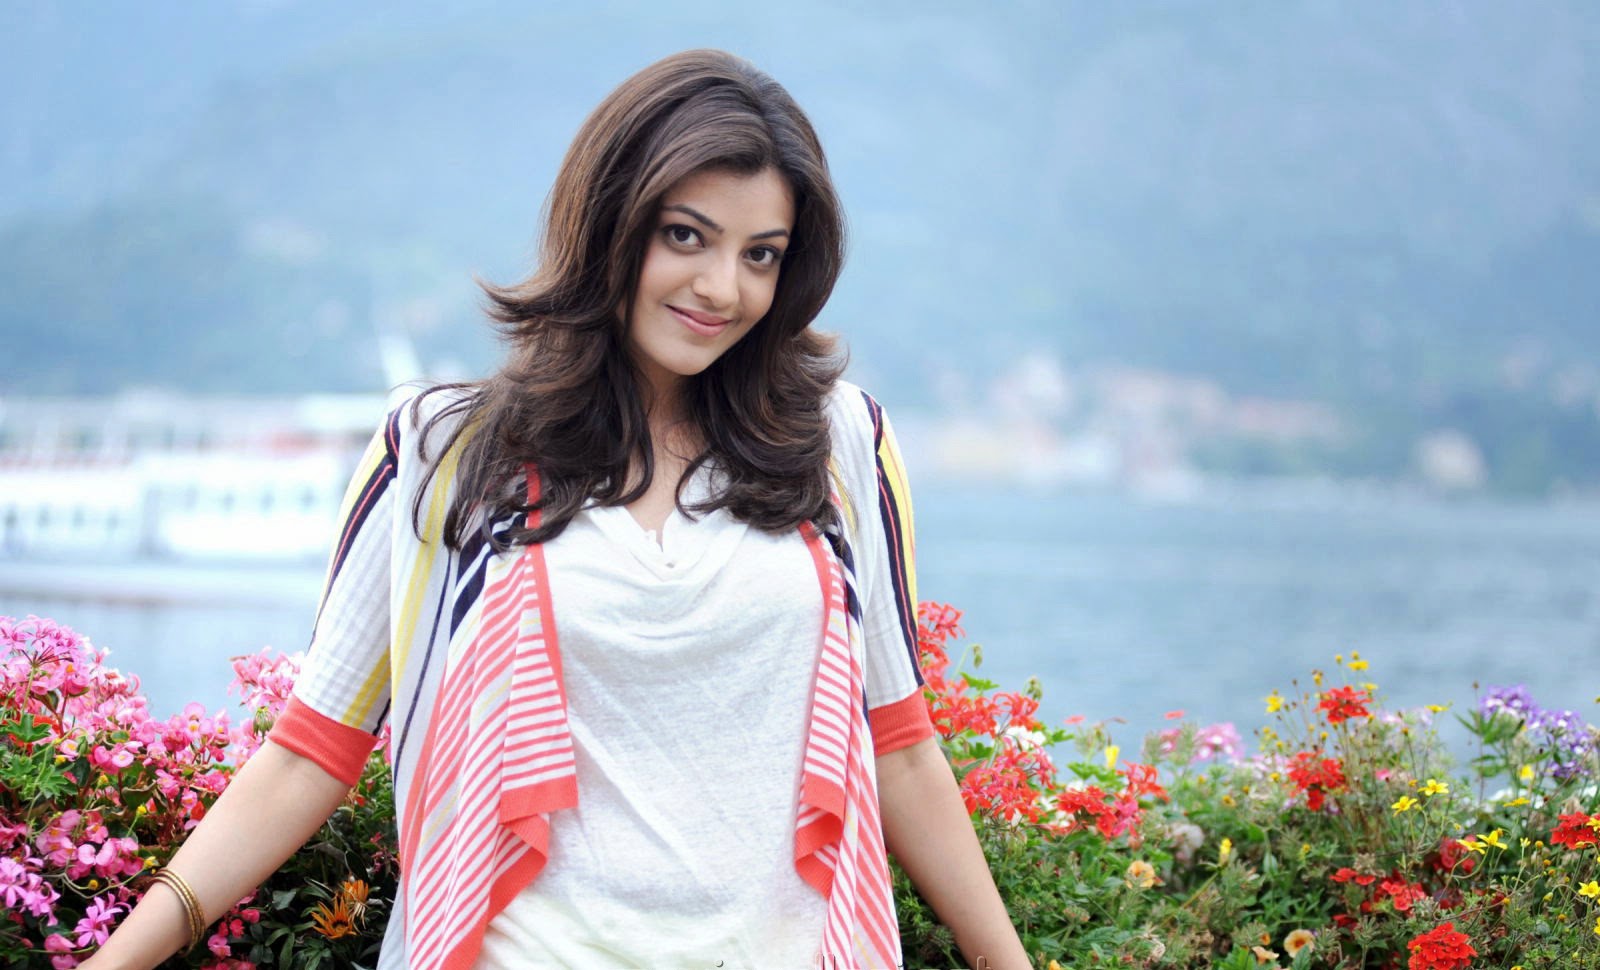 Hot Top 35 Kajal Aggarwal Wallpapers Hd Images Photos Collection